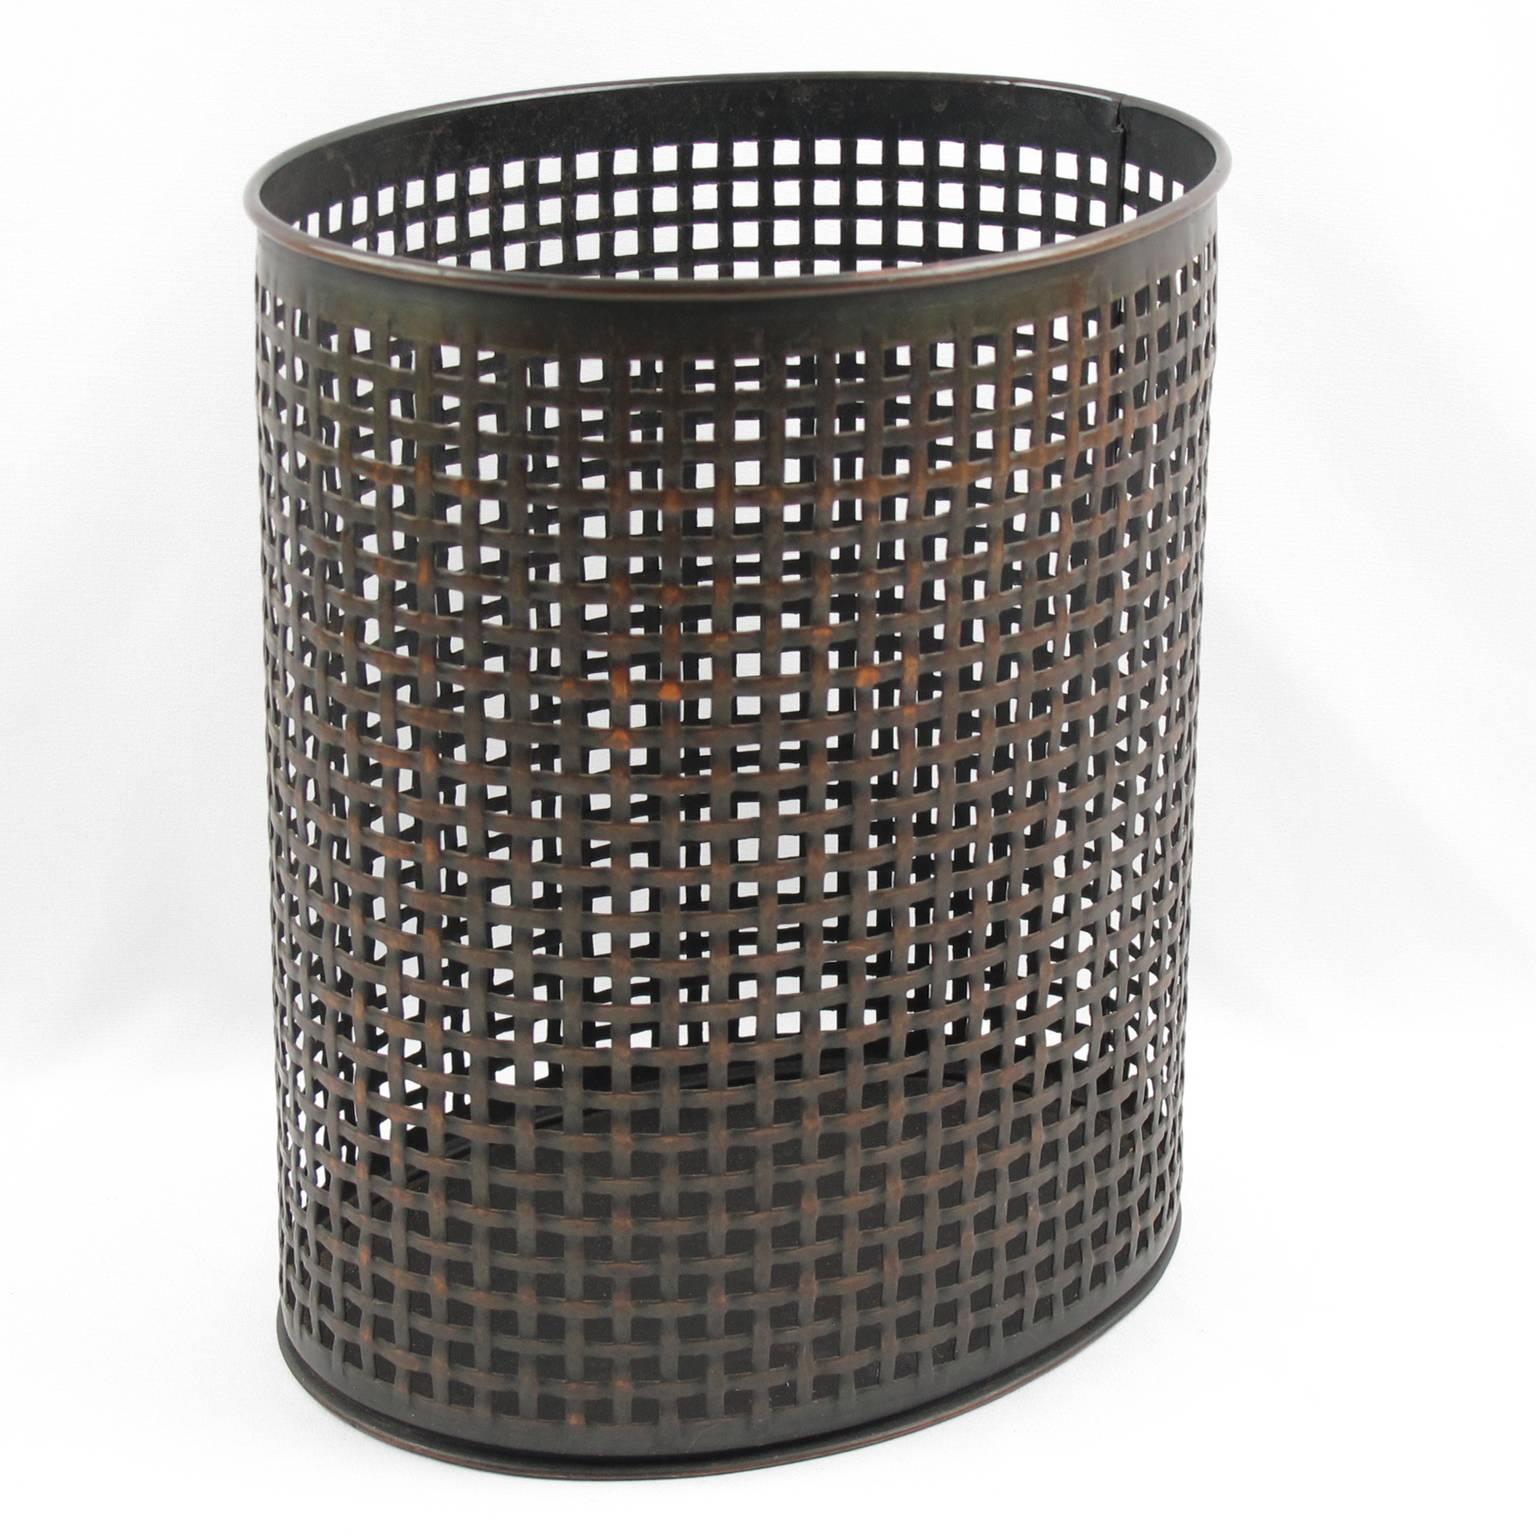 Mid-20th Century Perforated Metal Industrial Waste Basket in the Manner of Mathieu Mategot, 1950s